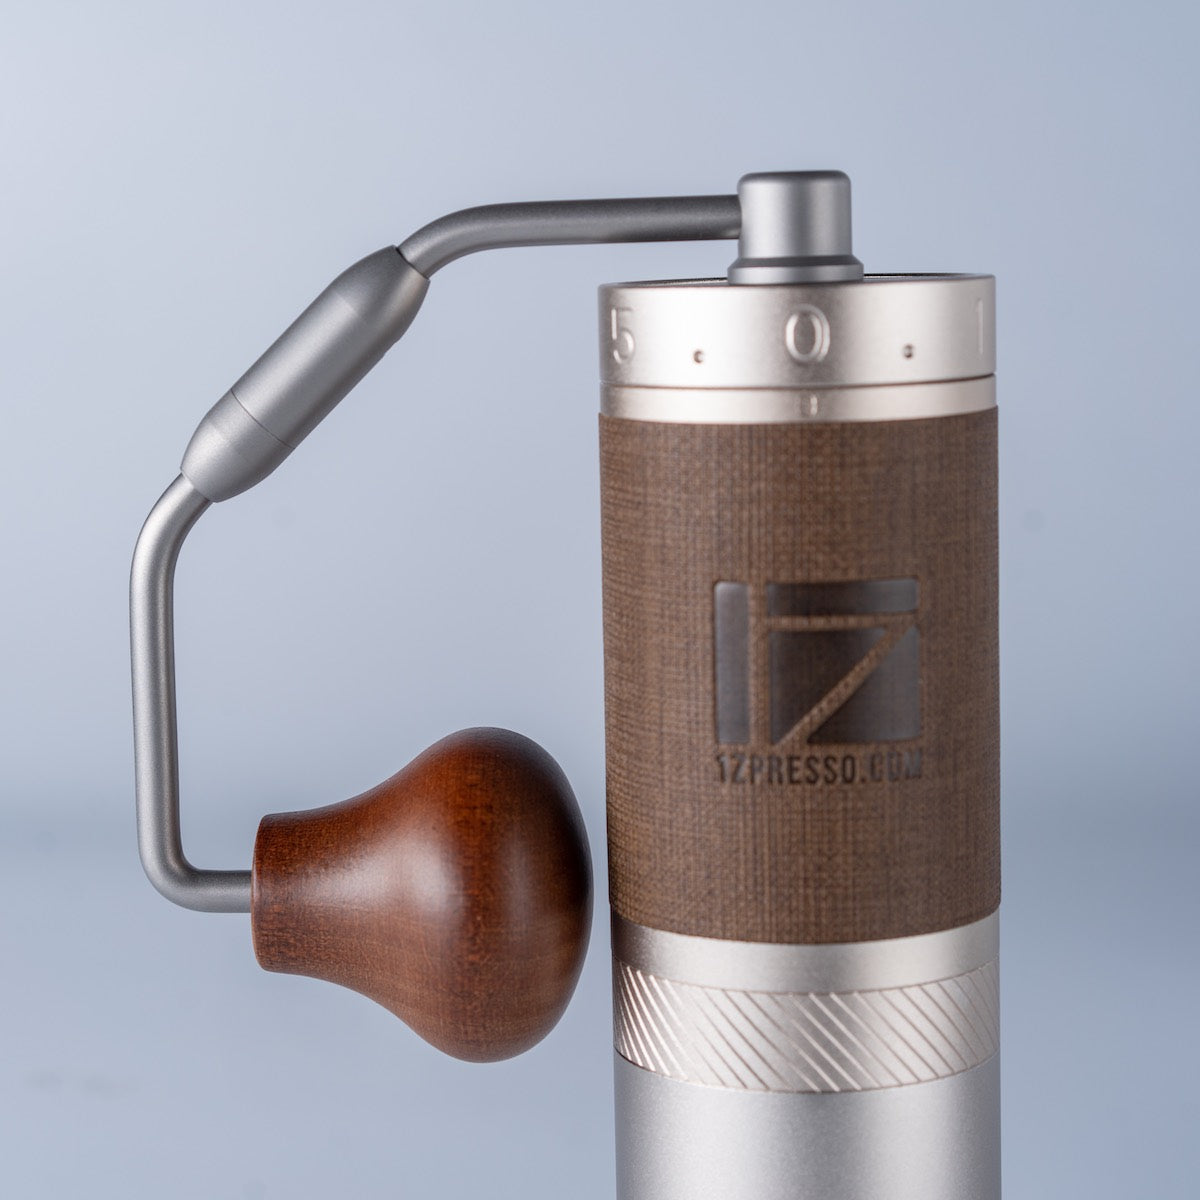 1Zpresso X-Pro S Manual Coffee Grinder (foldable crank) 1 | THE COFFEE GOODS